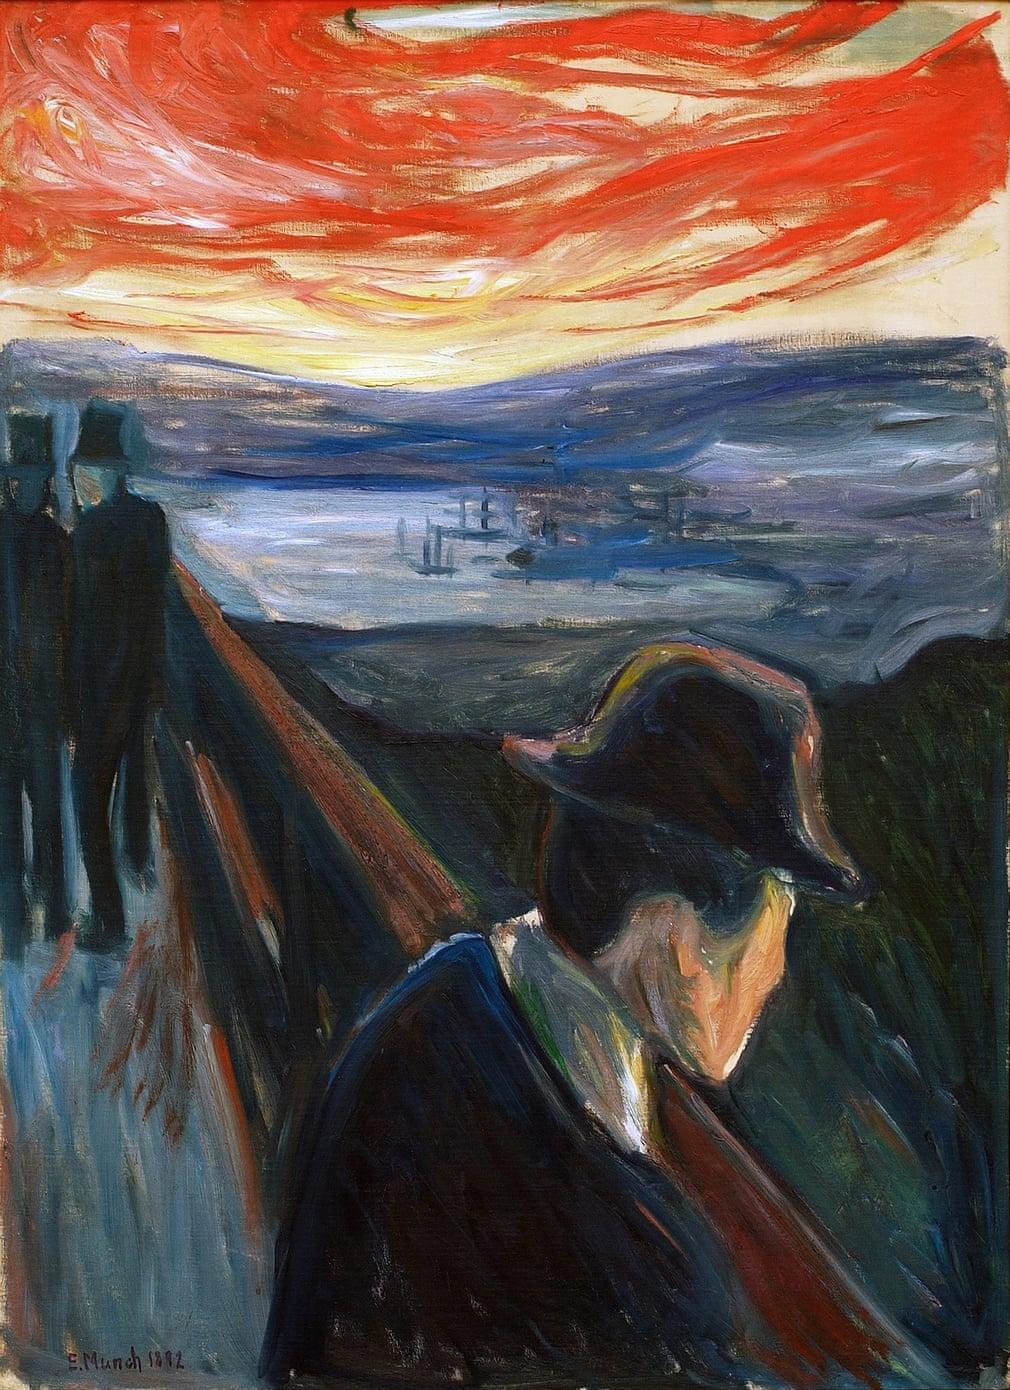 Philosophical Letters: Sick Mood at Sunset, Despair.(By Edvard Munch)